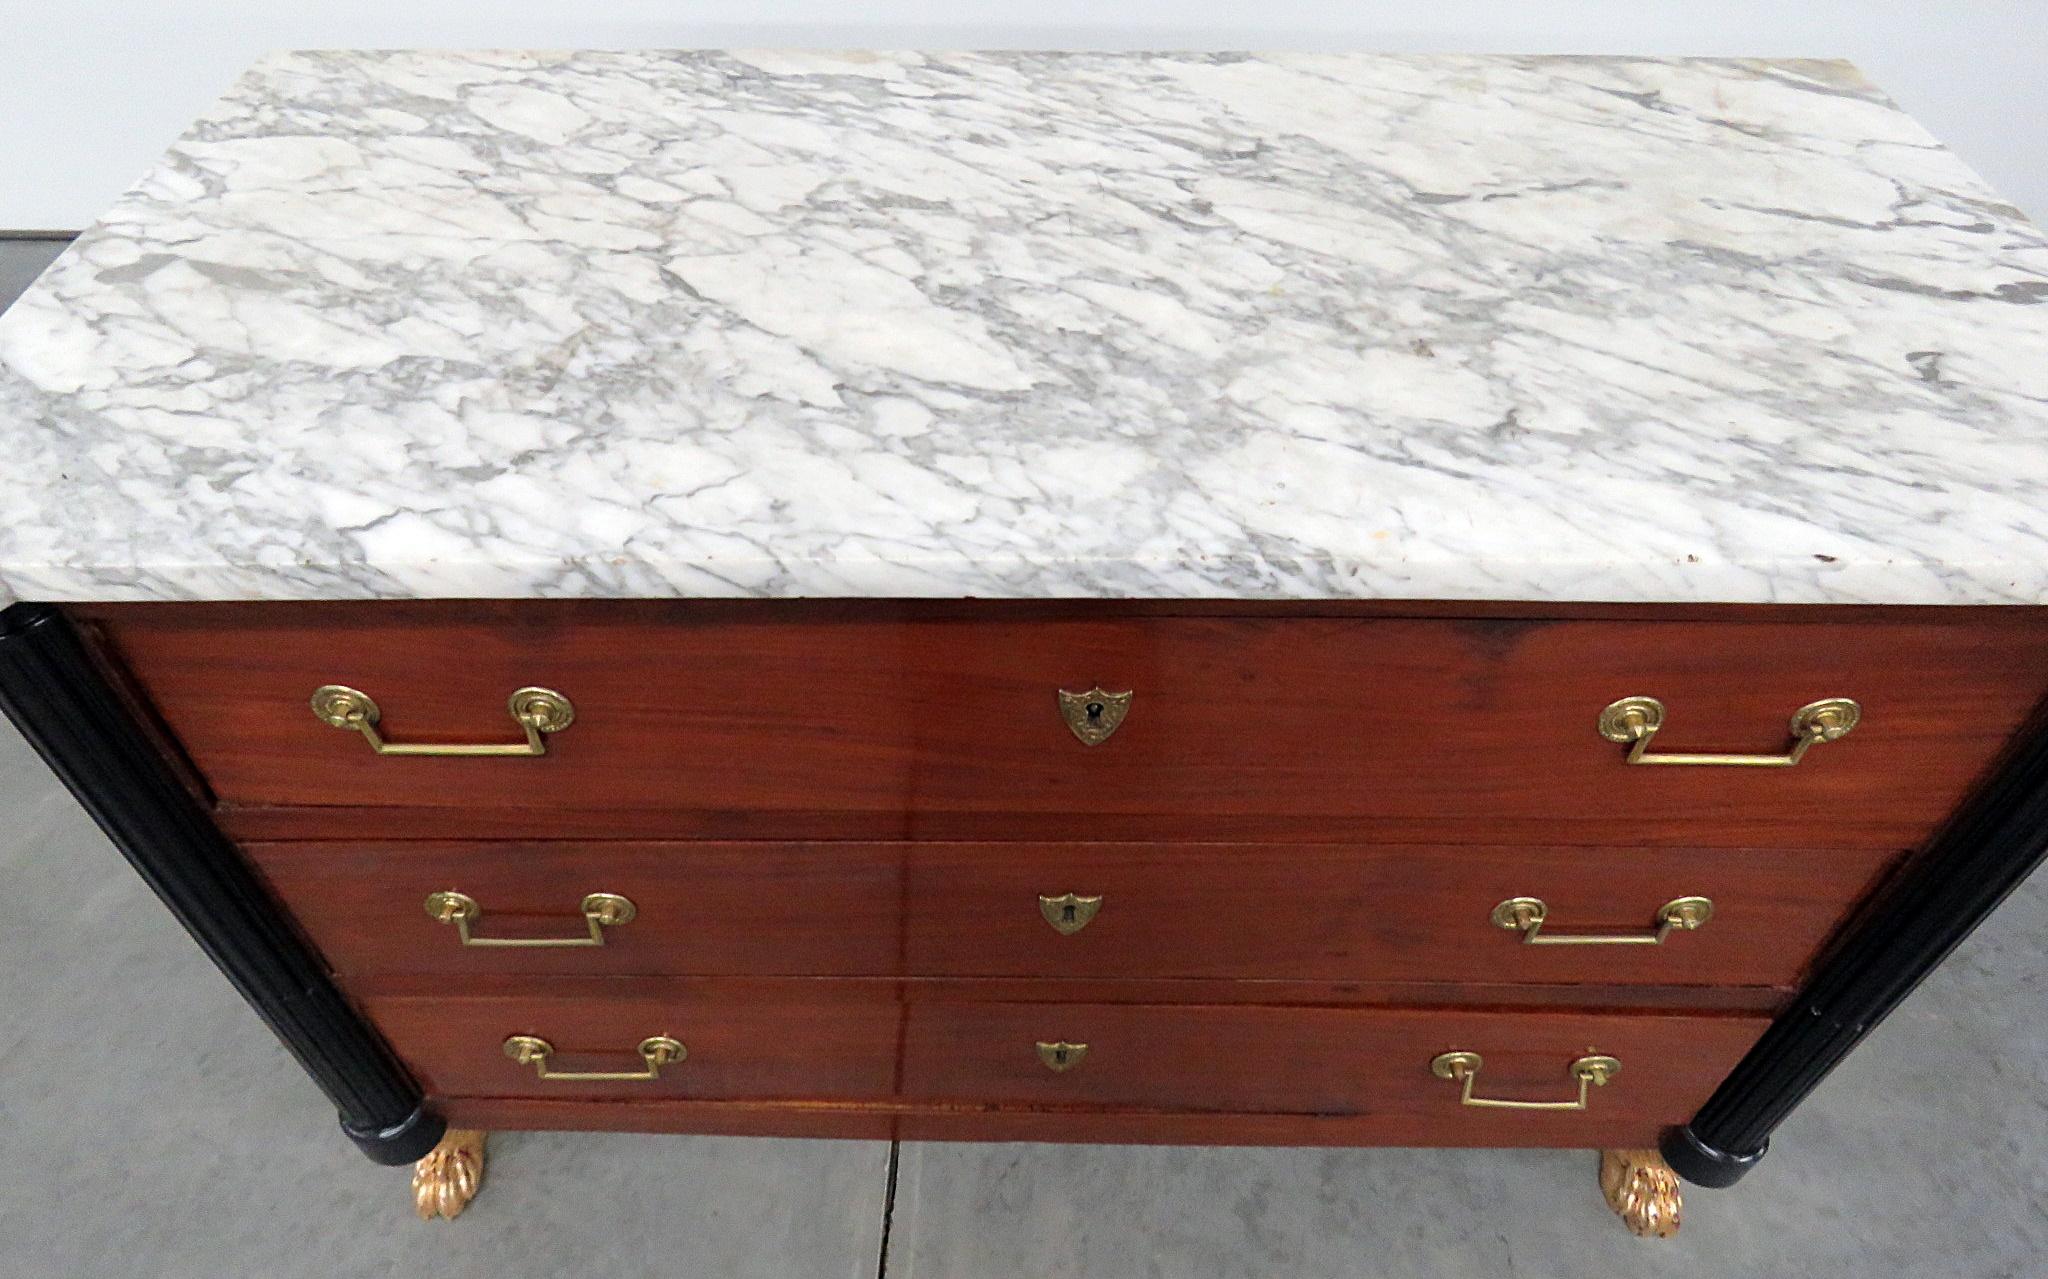 19th century French Directoire style 3-drawer marble-top commode with gilt and ebonized accents.